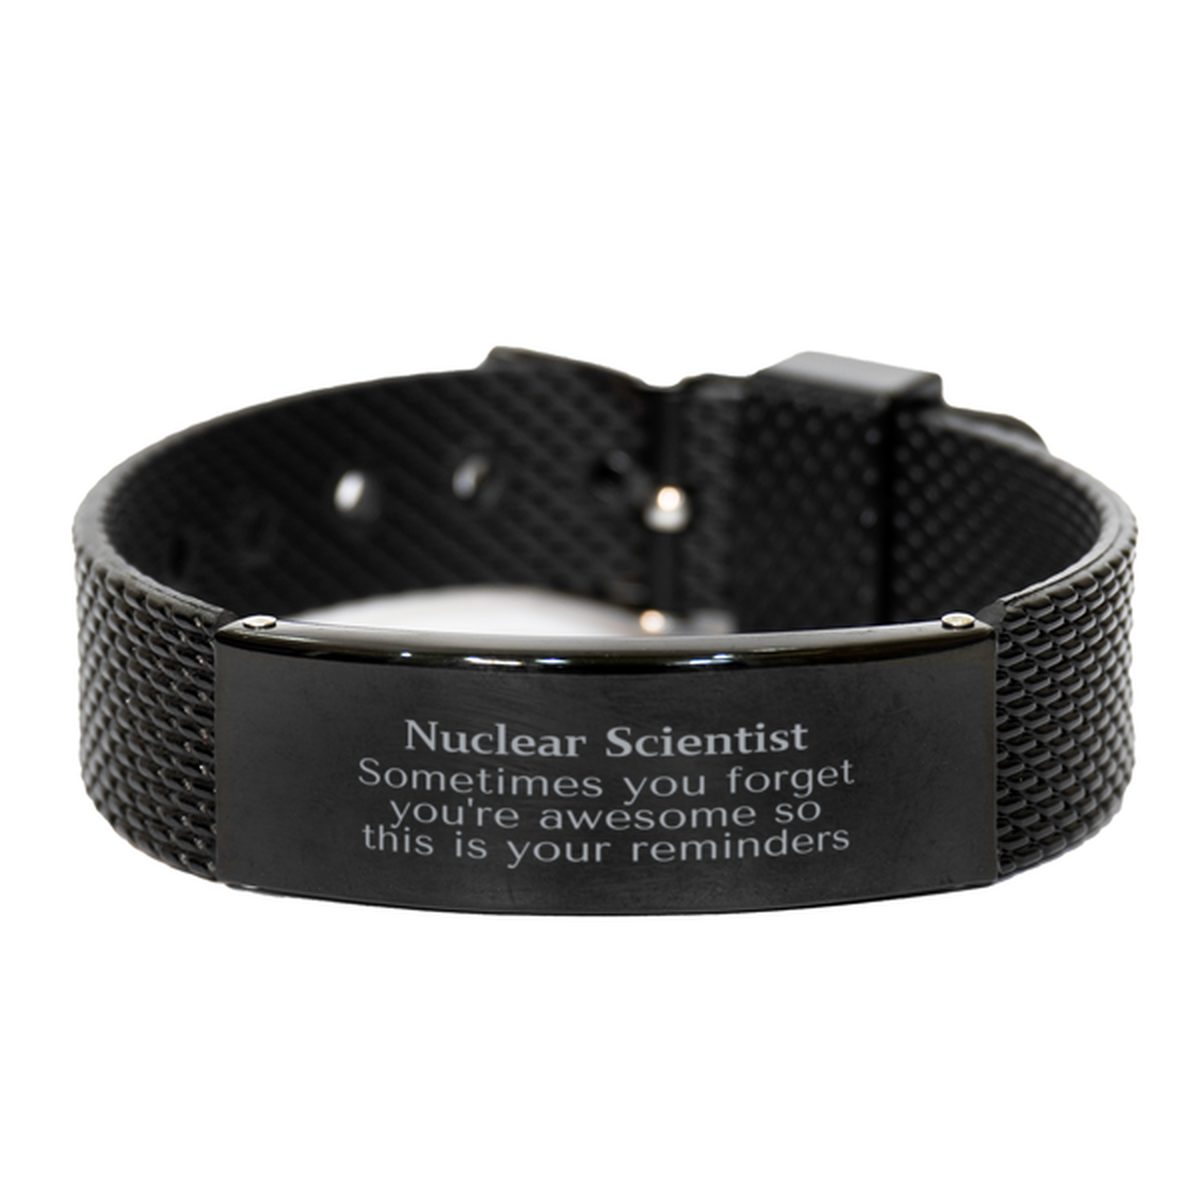 Sentimental Nuclear Scientist Black Shark Mesh Bracelet, Nuclear Scientist Sometimes you forget you're awesome so this is your reminders, Graduation Christmas Birthday Gifts for Nuclear Scientist, Men, Women, Coworkers